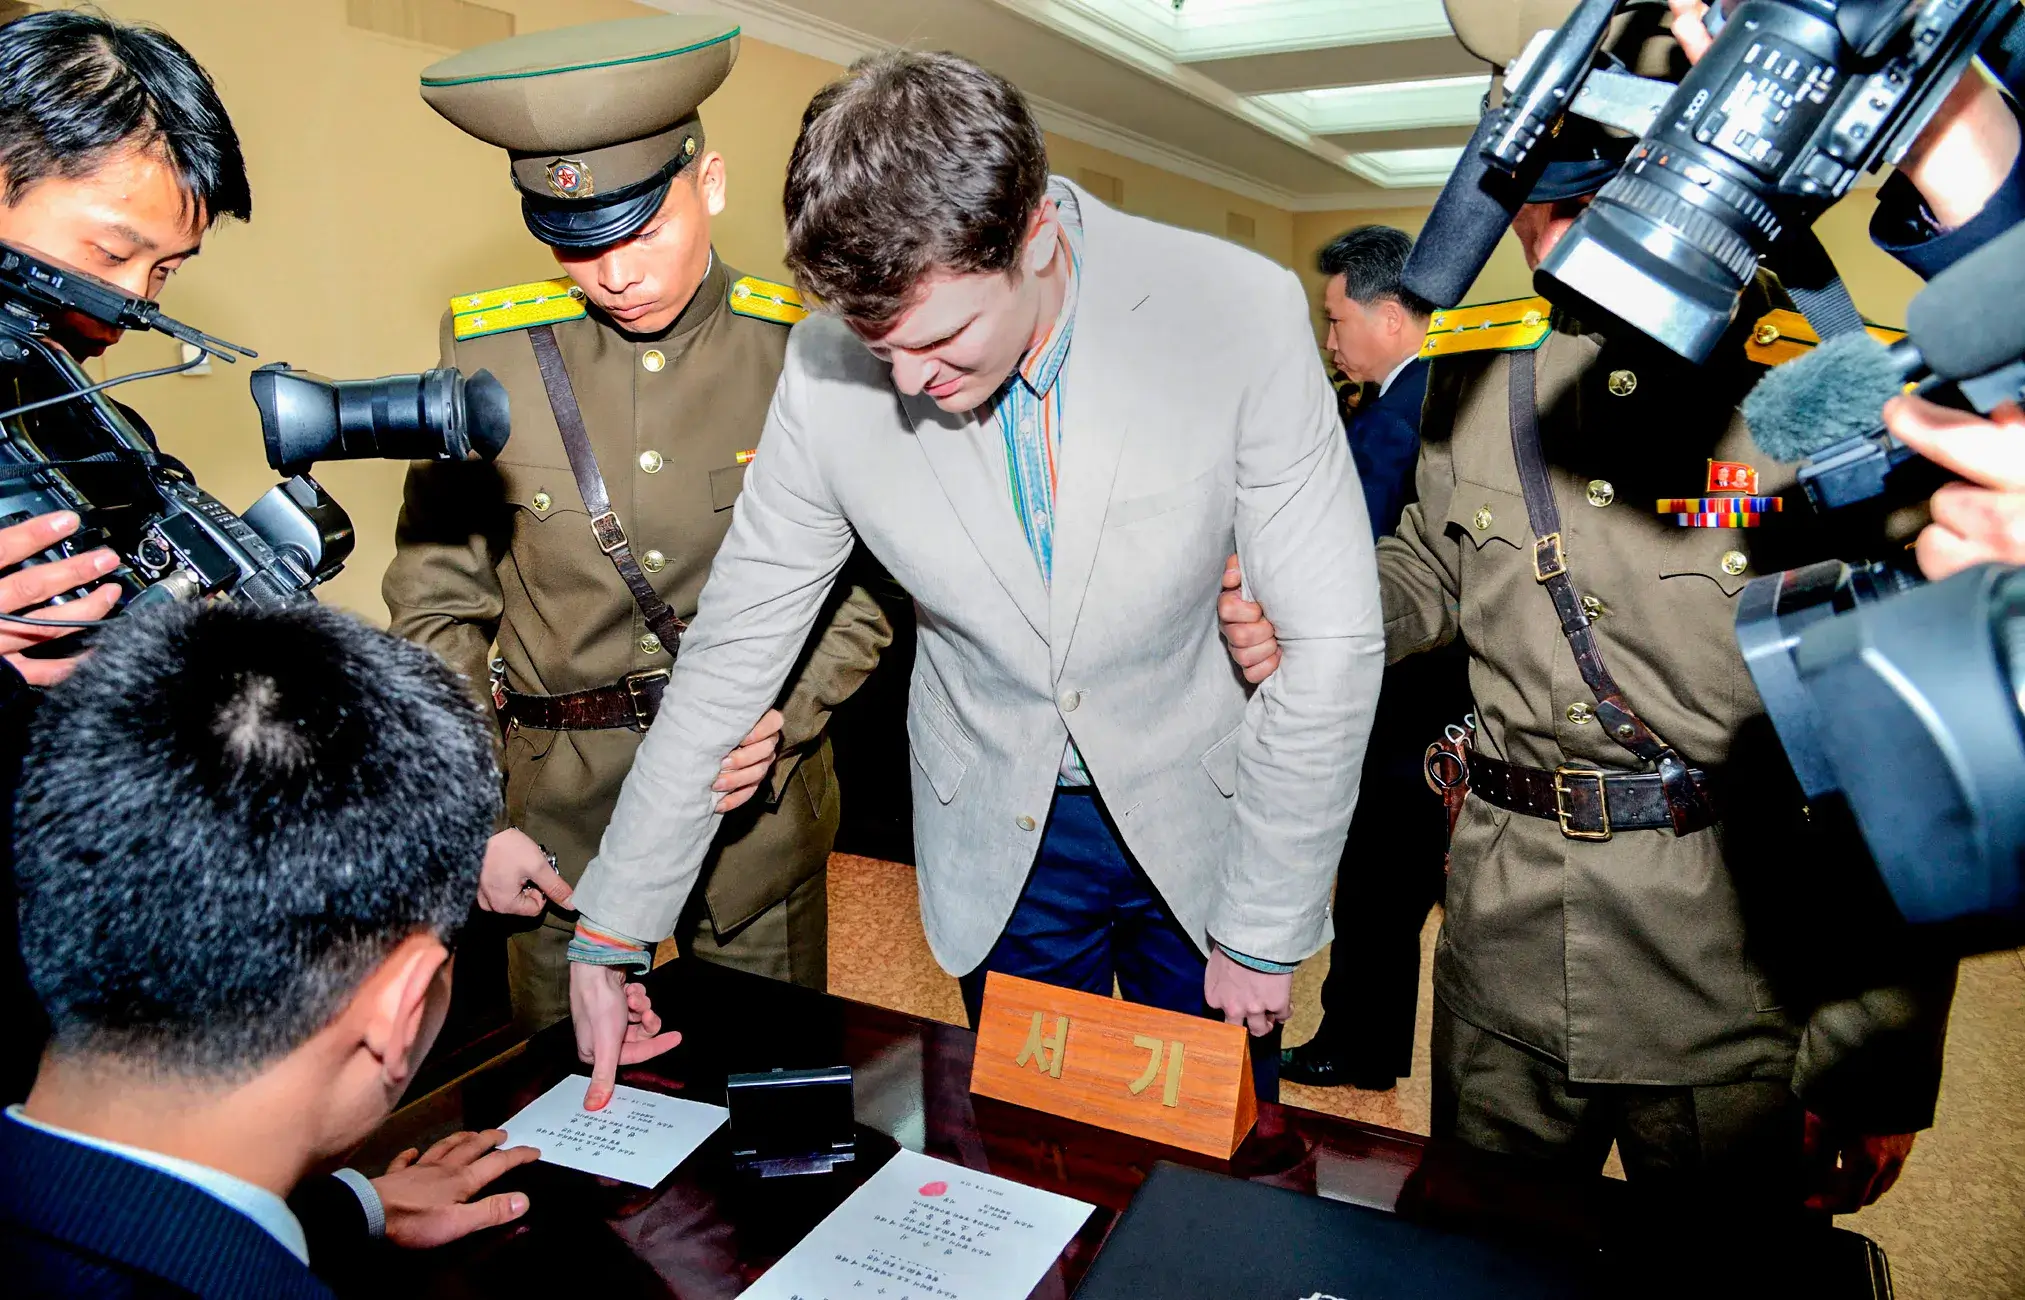 In this Feb. 29, 2016, file photo, American student Otto Warmbier speaks as he is presented to reporters in Pyongyang, North Korea. More than 15 months after he gave a staged confession in North Korea, he is with his Ohio family again. But whether he is even aware of that is uncertain. (AP Photo/Kim Kwang Hyon, File)